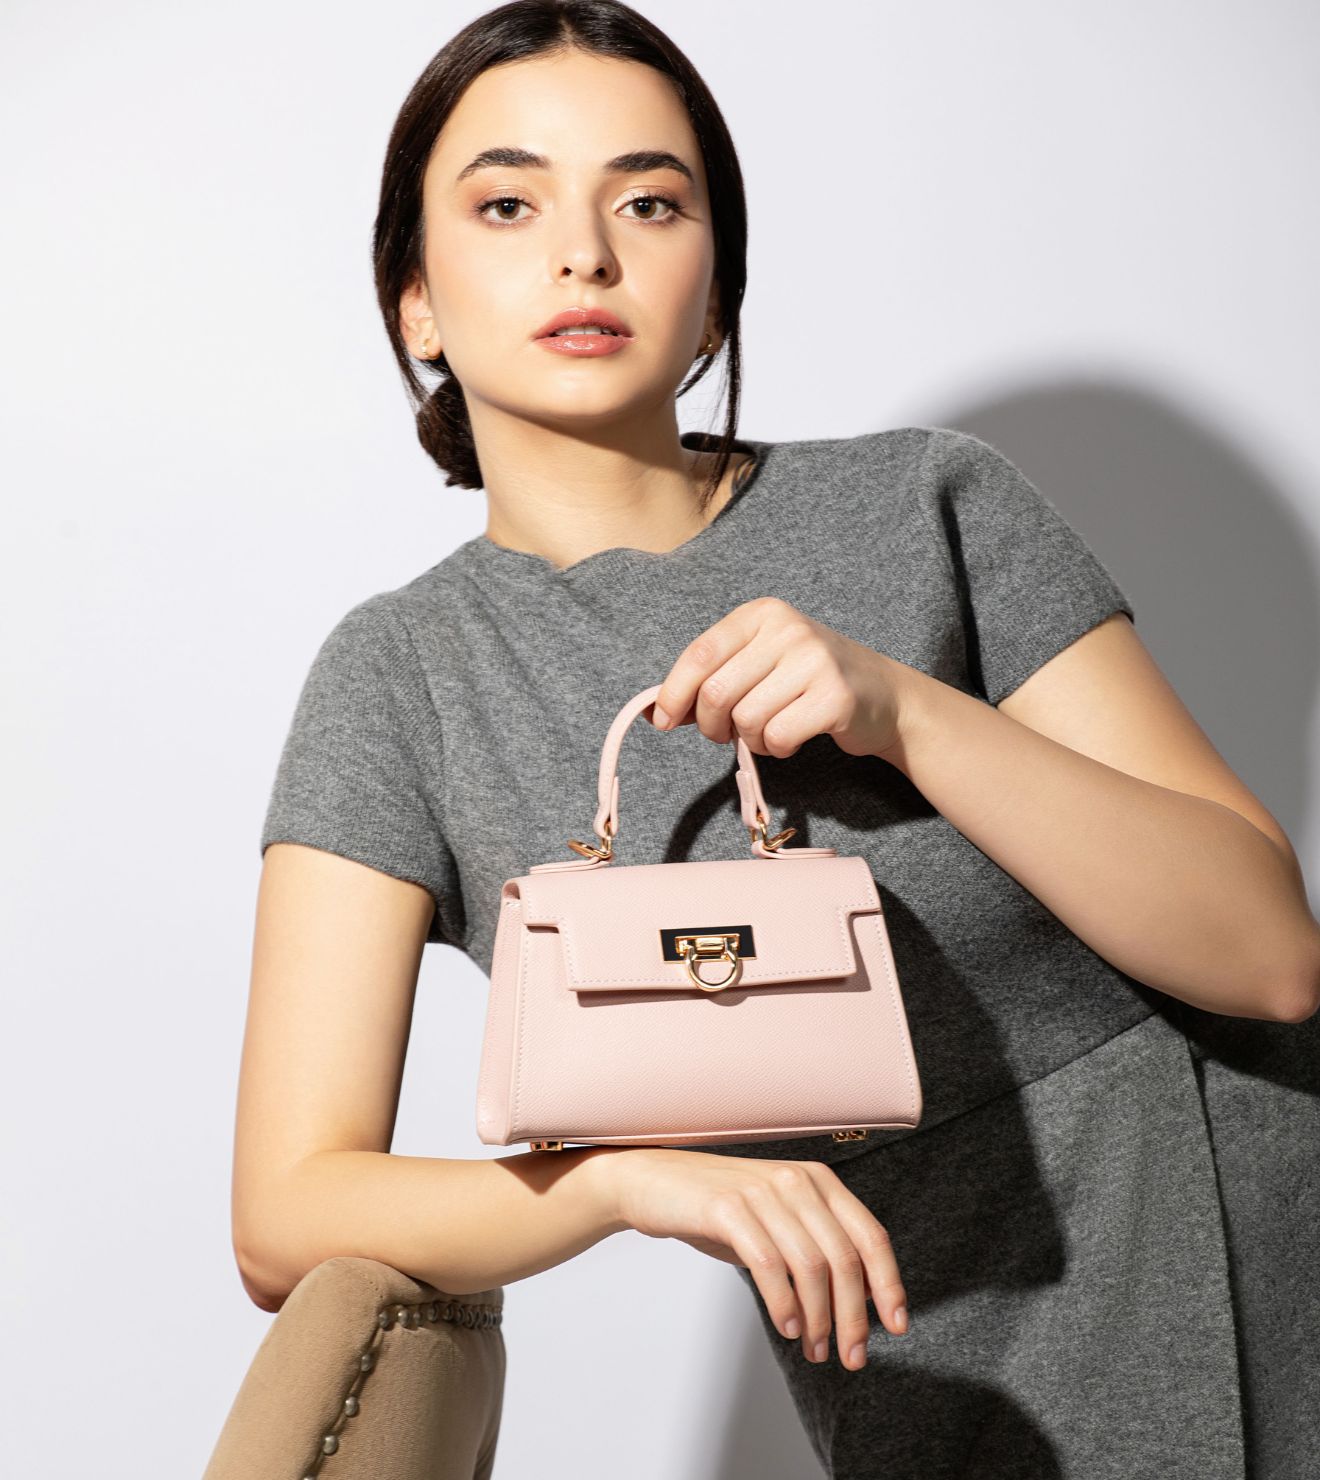 Model in a chic gray dress holds a stylish pink purse By levantine bags, epitomizing luxury and grace